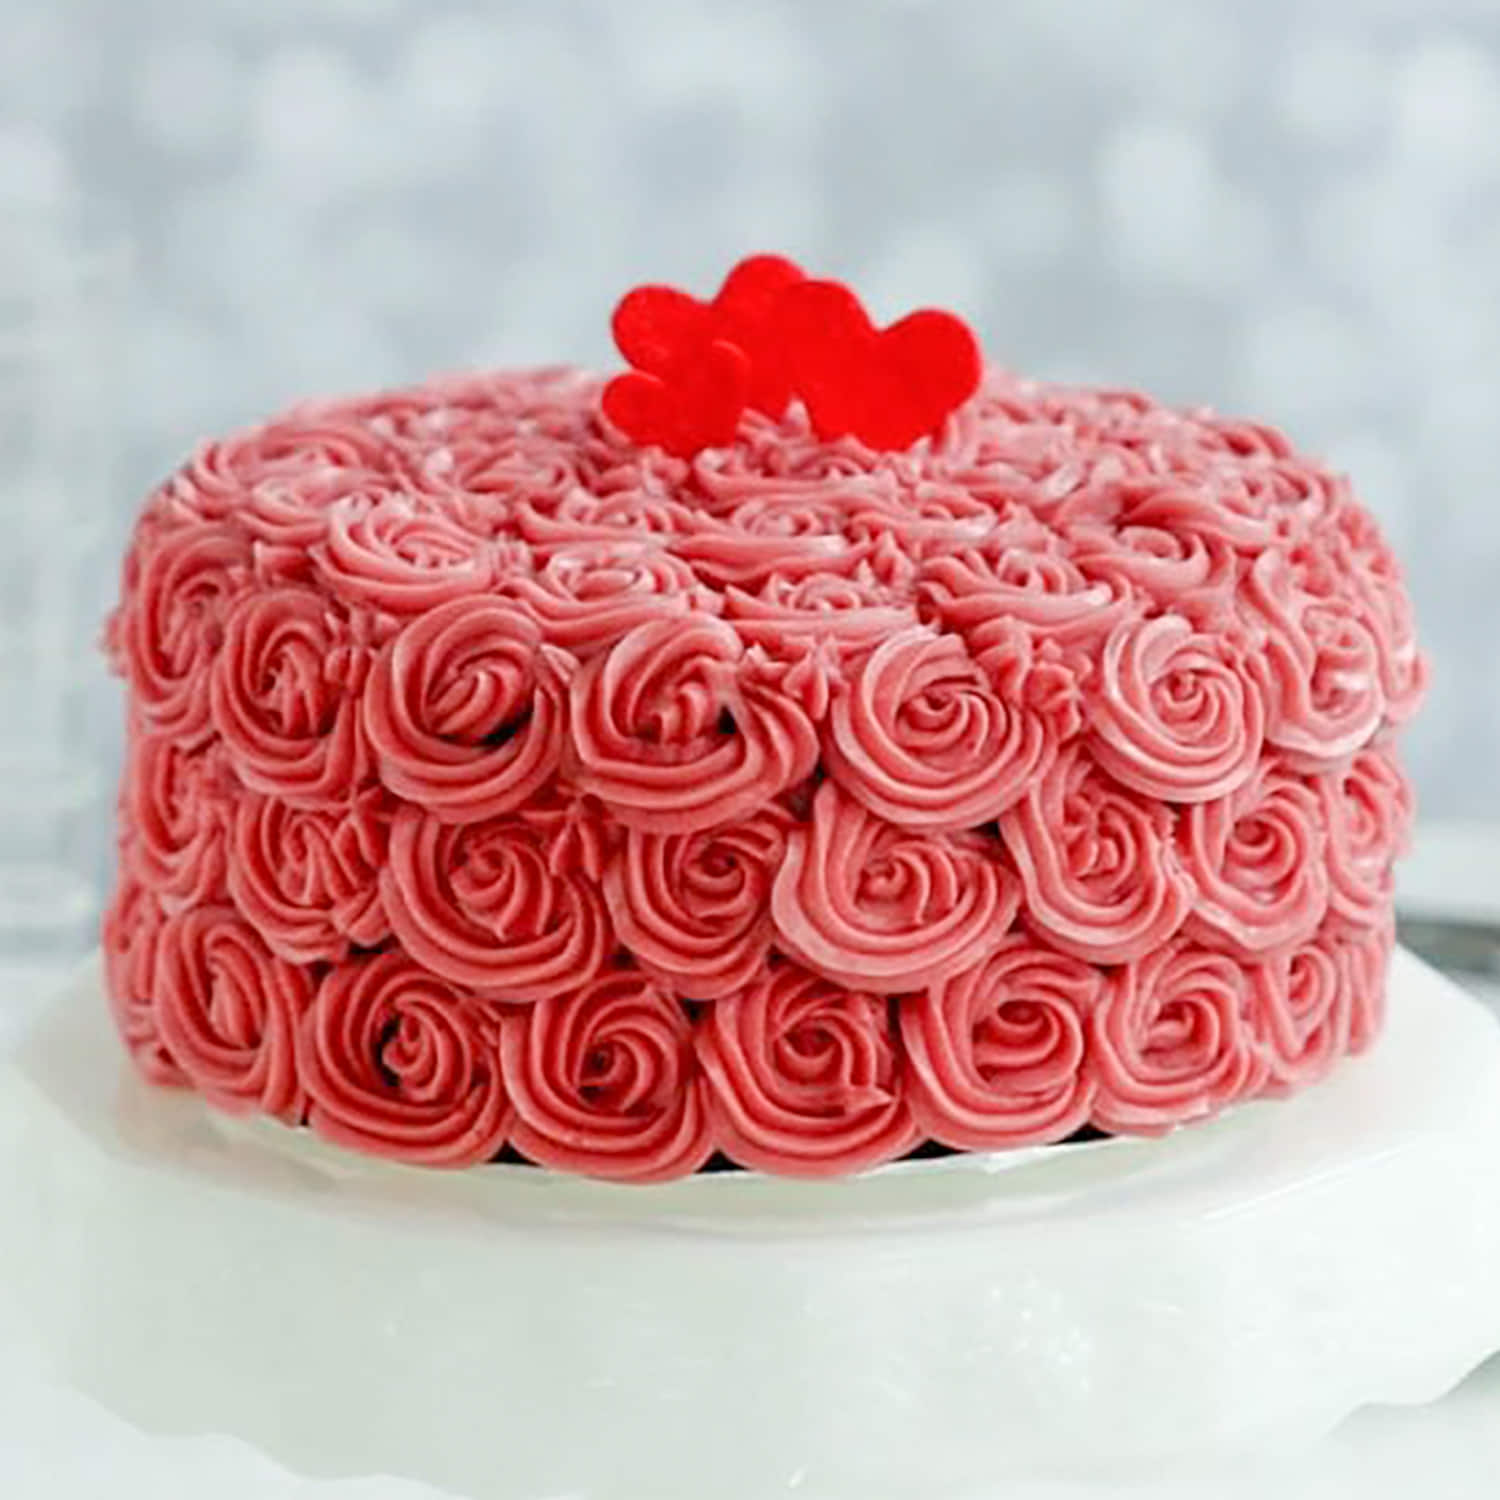 Red And Yellow Pink Floral Chocolate Cake (Eggless) - Ovenfresh